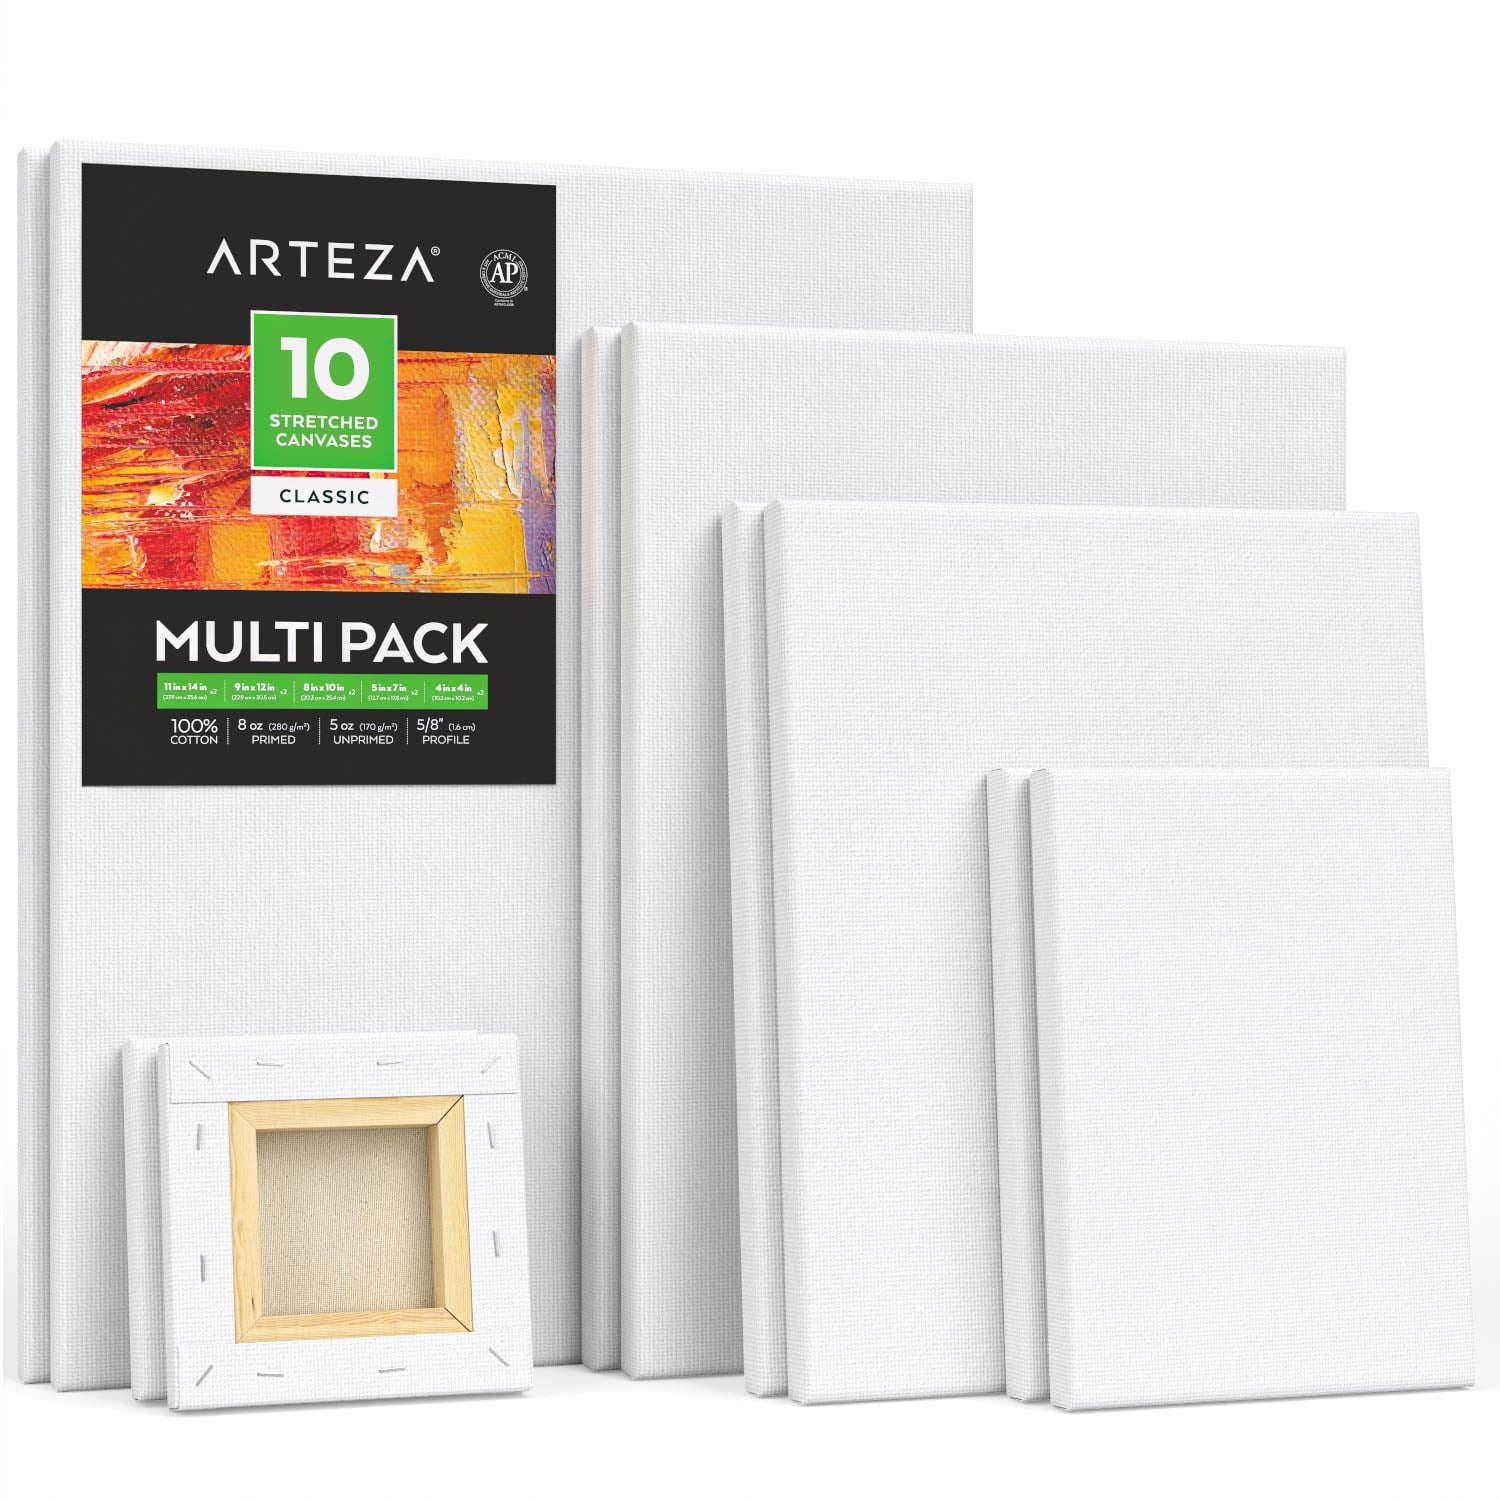 Gencrafts Stretched White Canvas Multi Pack - 5x7, 8x10, 9x12, 11x14 (2 of Each) Set of 8 - Triple Primed - 100% Cotton - for Acrylic, Oil, Other